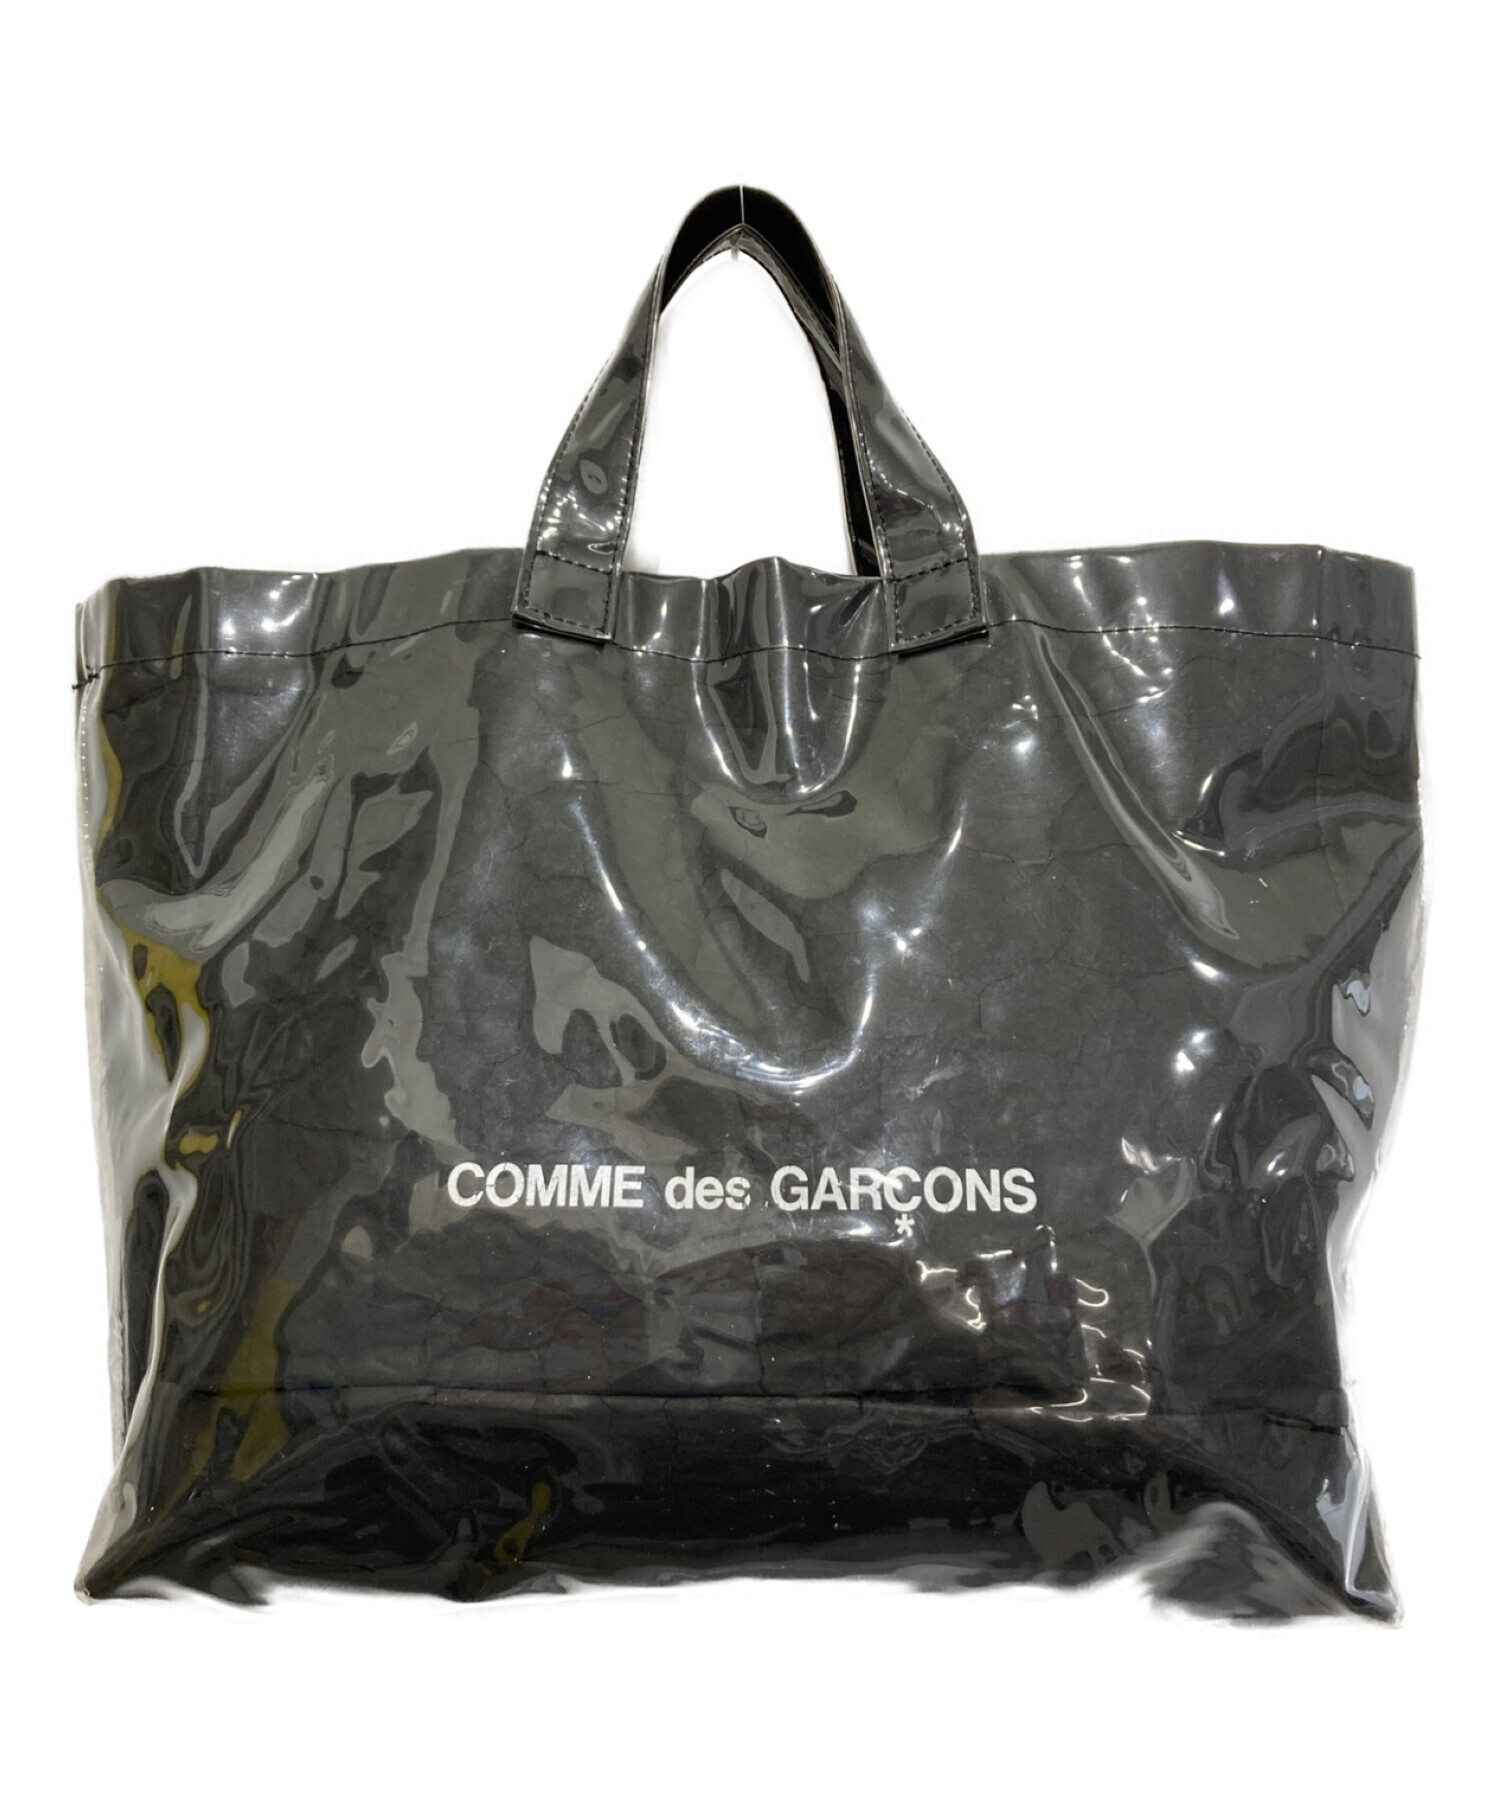 COMME des GARCONS (コムデギャルソン) PVCトートバッグ